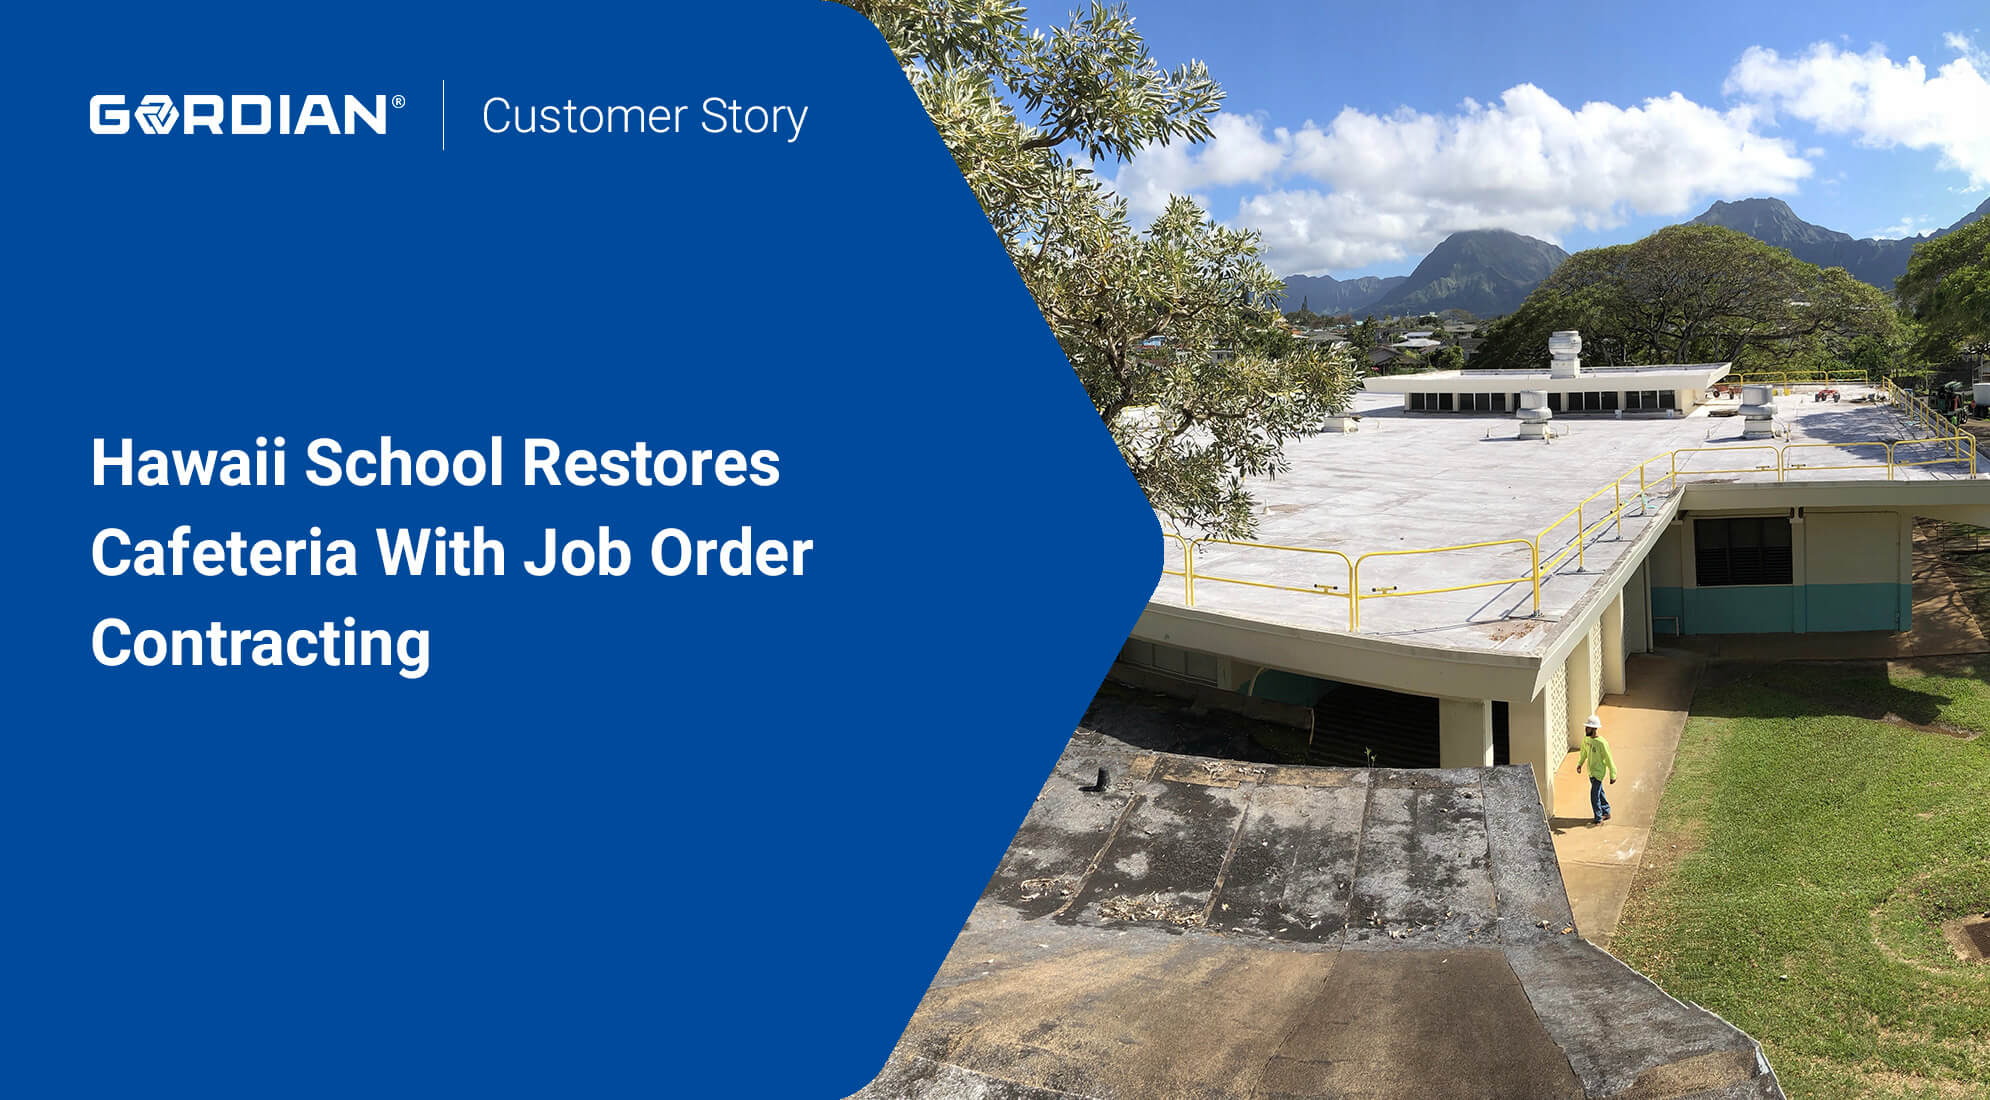 Hawaii School Leverages Job Order Contracting to Revamp Cafeteria Quickly 7